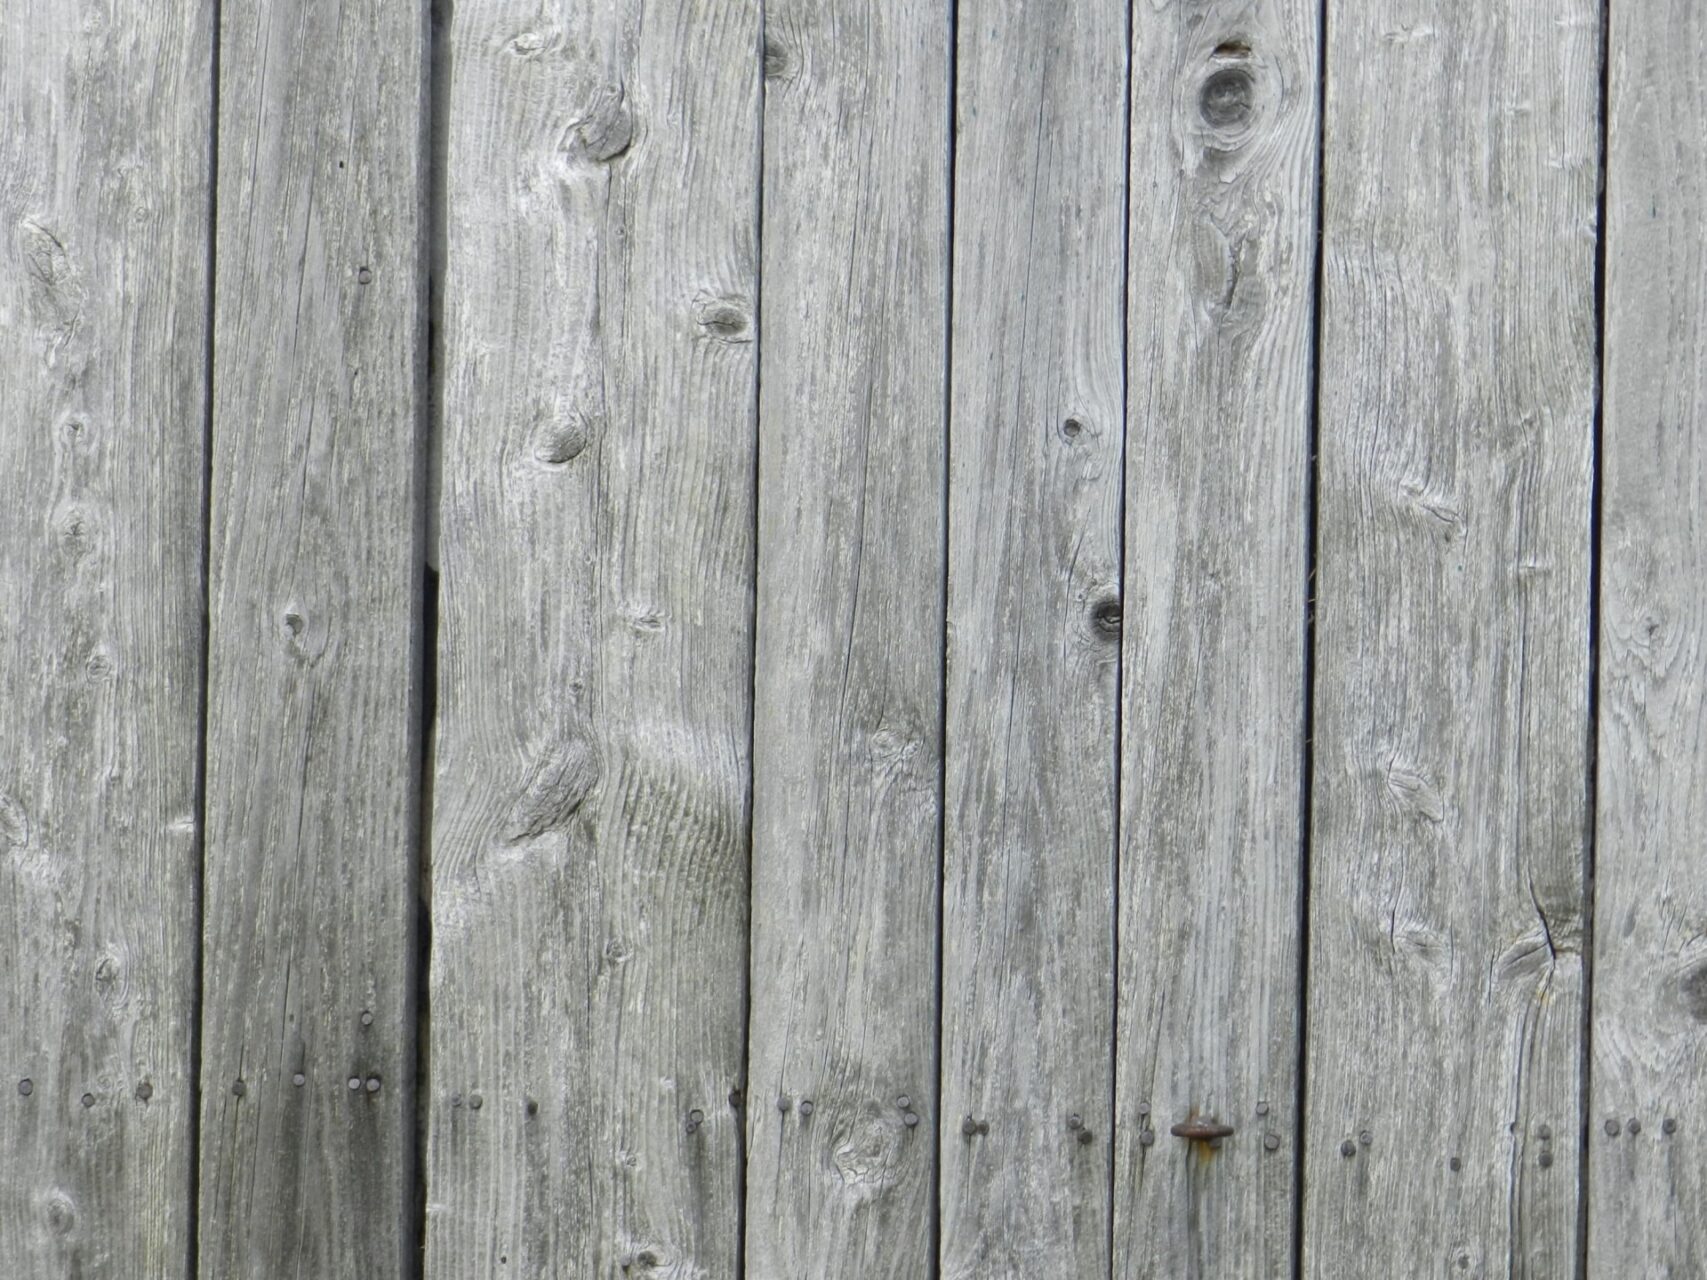 Low contrast gray wood of a barn